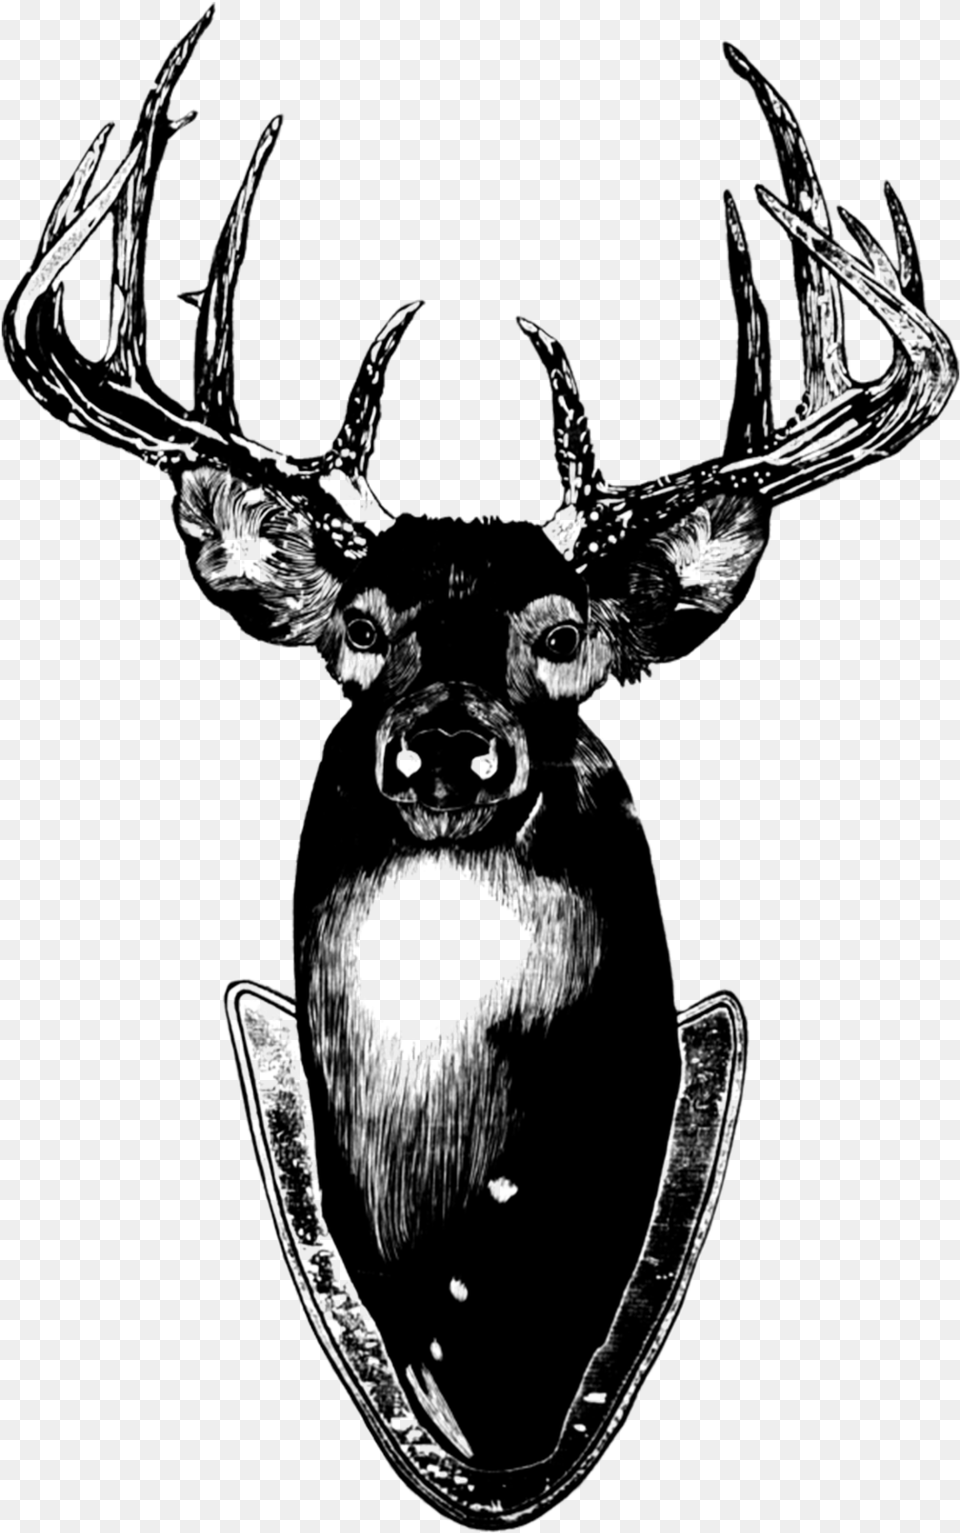 Deer Tattly Stag Head Card Amp Temporary Tattoo Only, Animal, Antler, Mammal, Wildlife Png Image